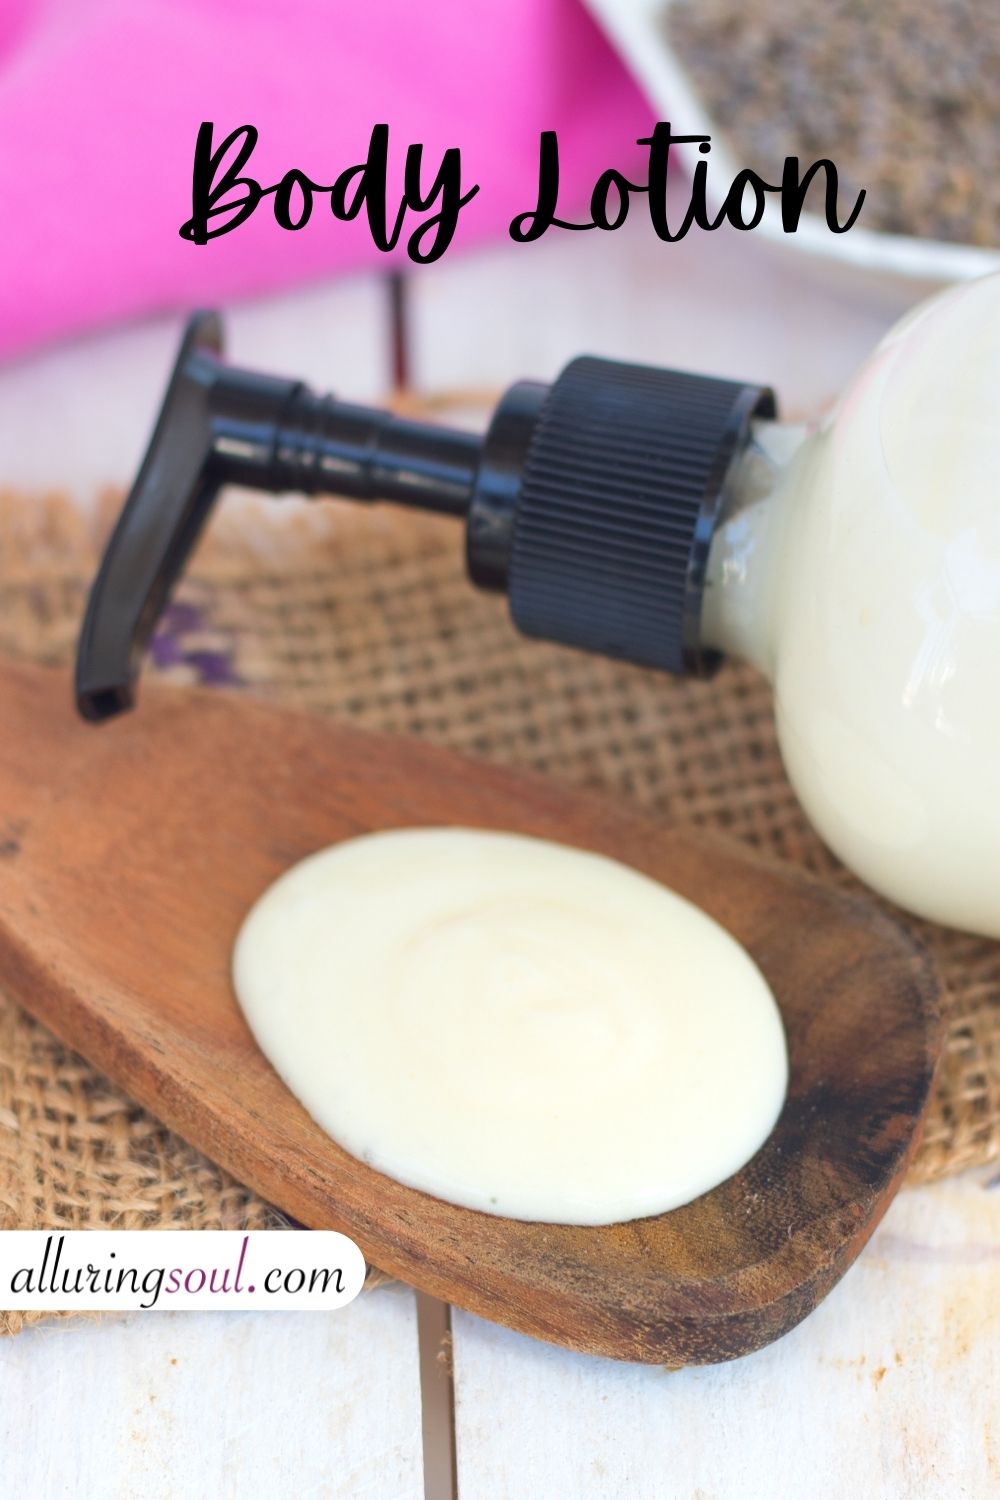 Lotions vs Creams vs Body Butters: Differences and which one to use?